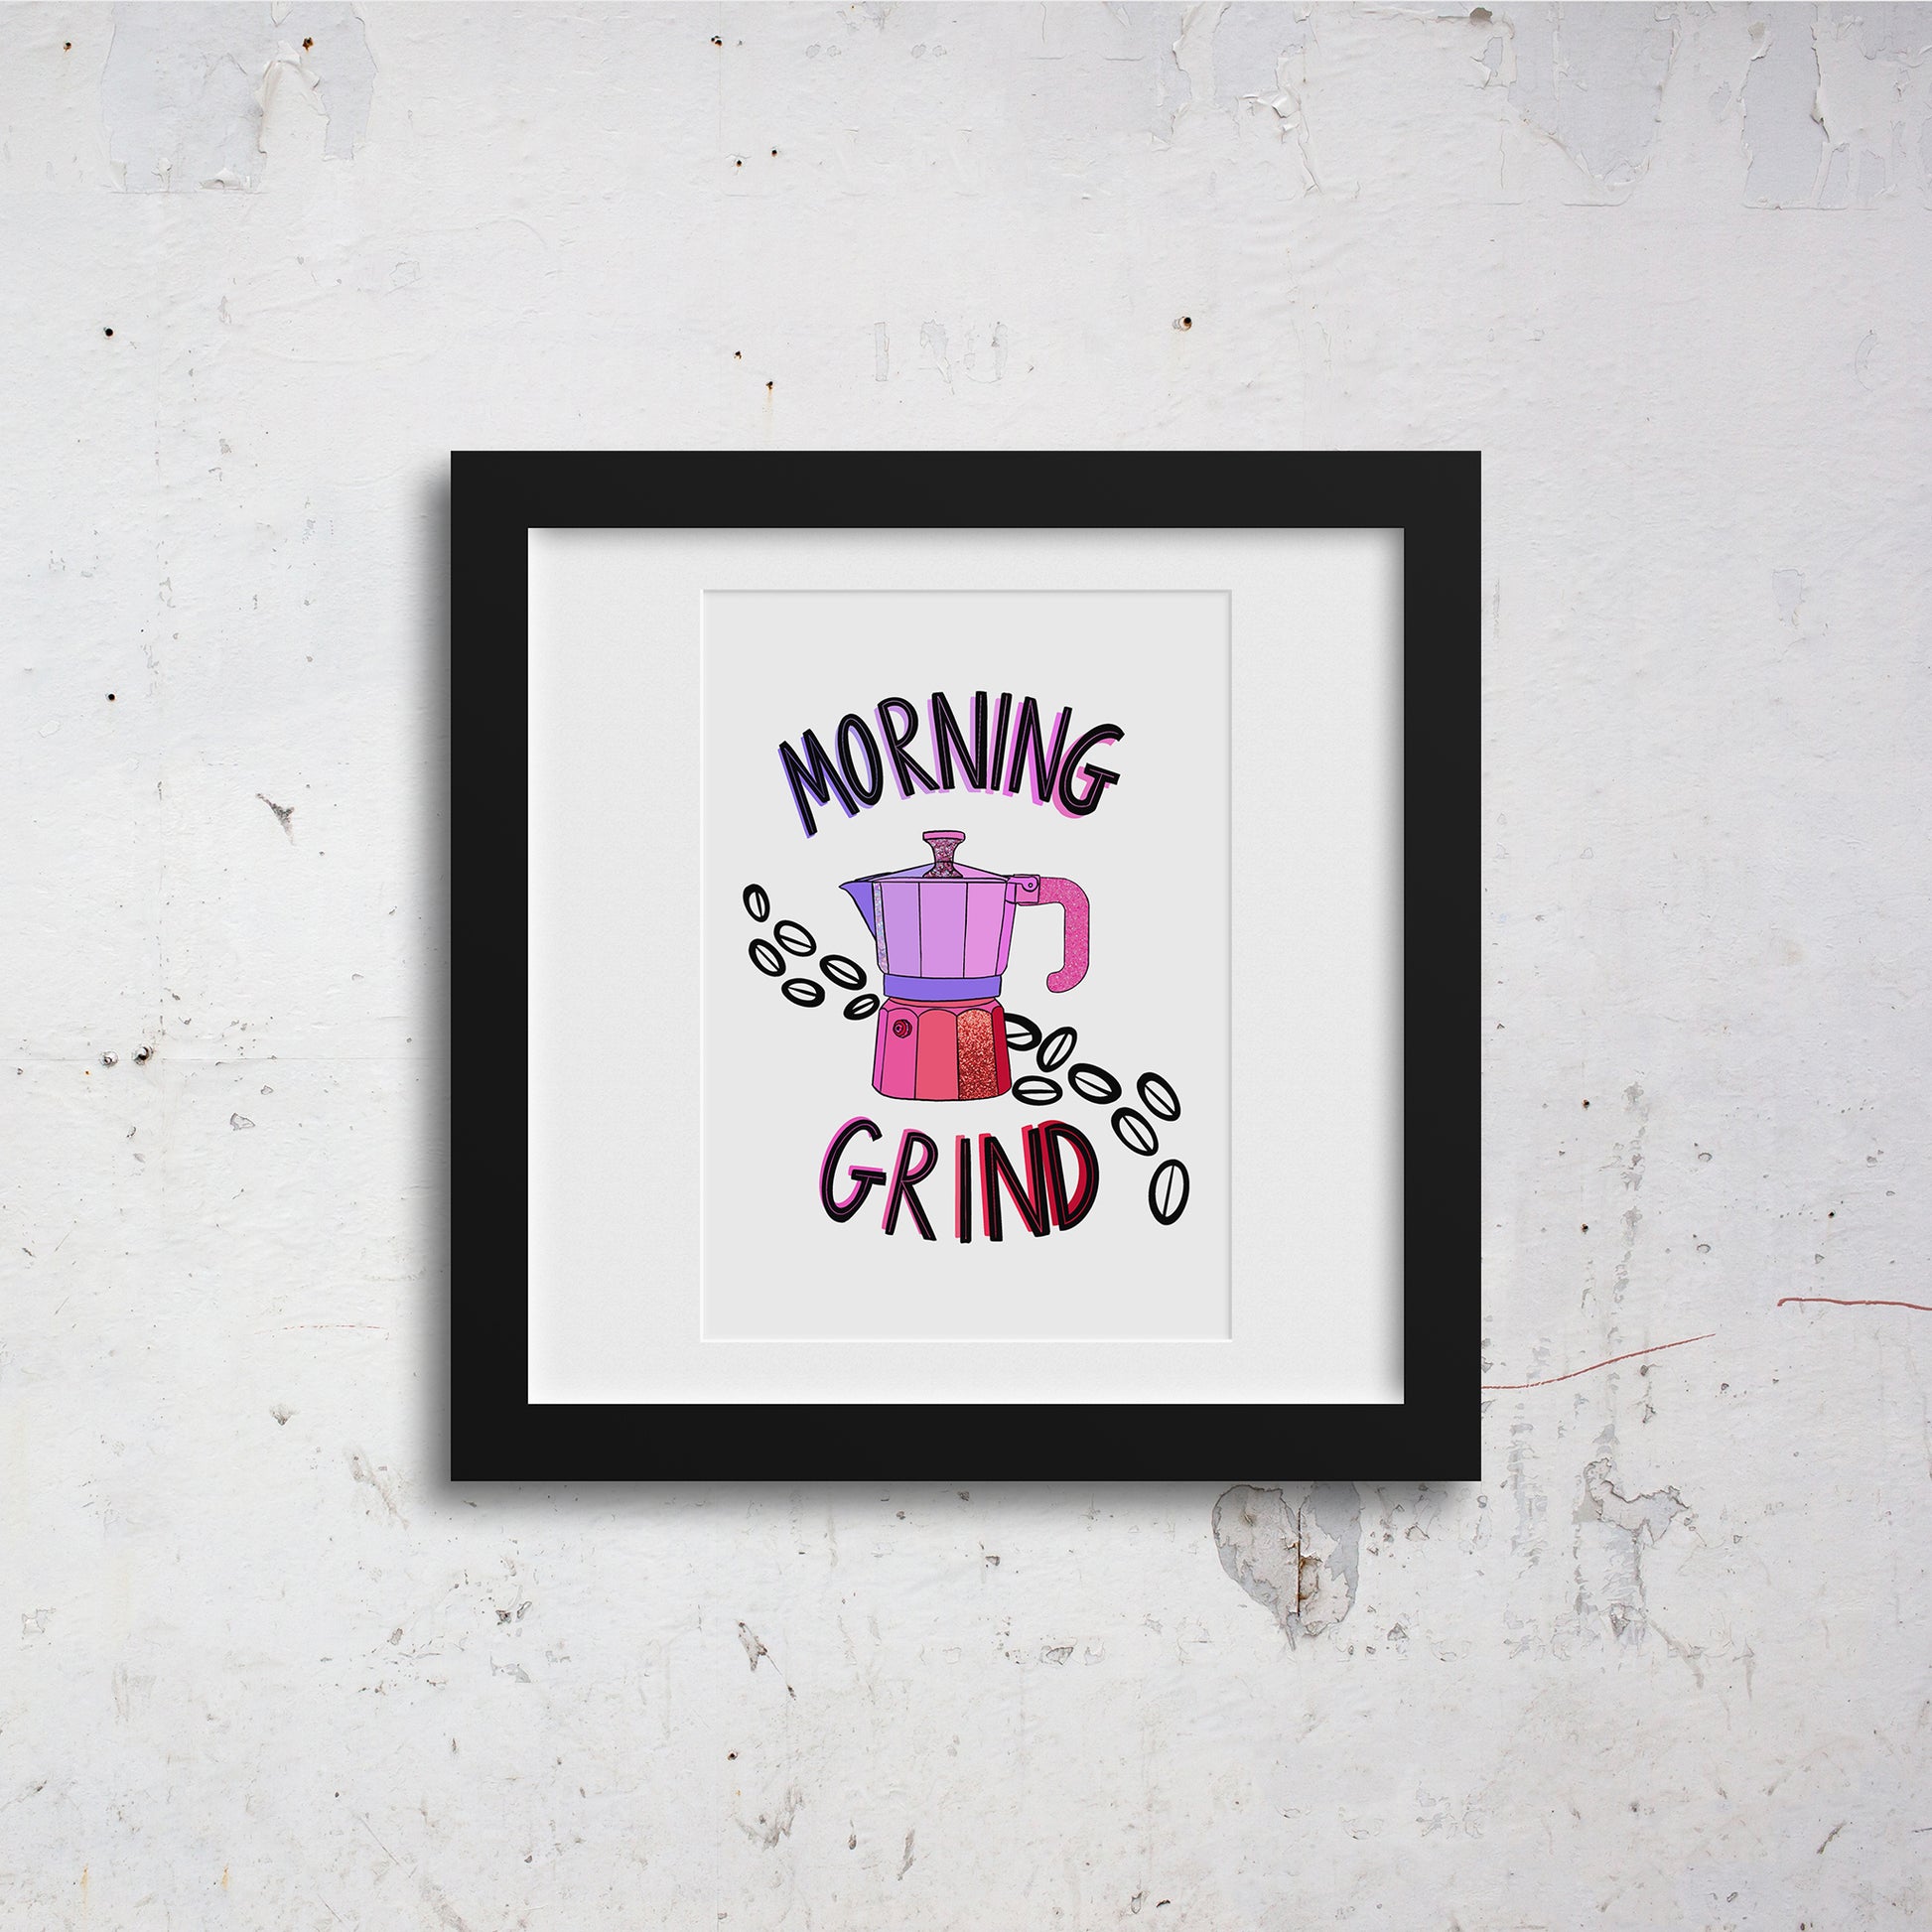 Image shows a framed illustration of a stovetop espresso maker in shades of pink and purple with ink drawn coffee beans behind it. Modern graphic lettering reads Morning Grind. 